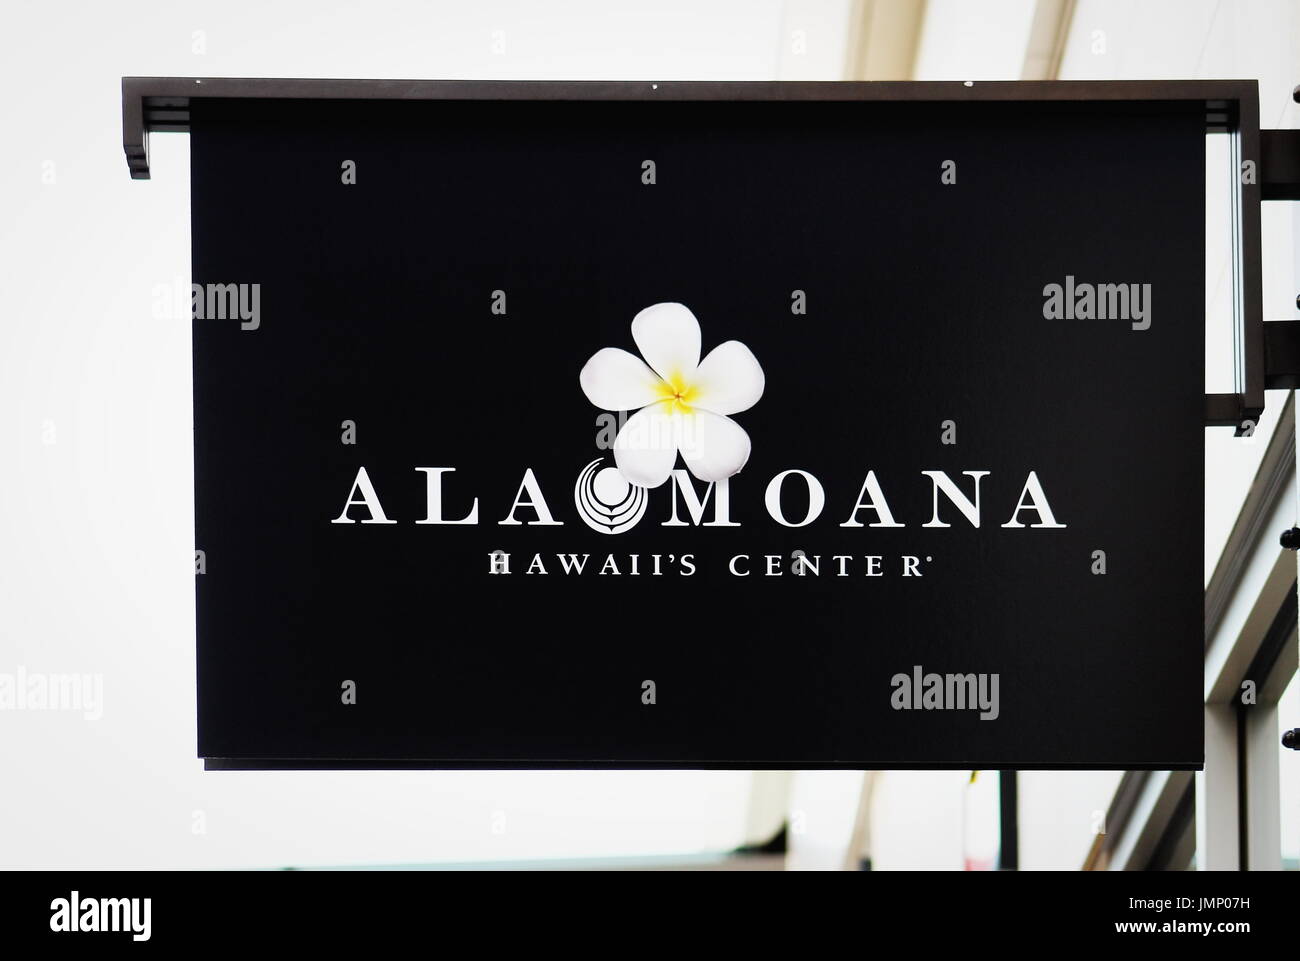 HONOLULU - AUGUST 7, 2014: Entrance To Neiman Marcus At The Ala Moana  Center Which Sells High-end Clothing And Feature Fancy Restaurants On  August 7, 2014. Stock Photo, Picture and Royalty Free Image. Image 32795452.